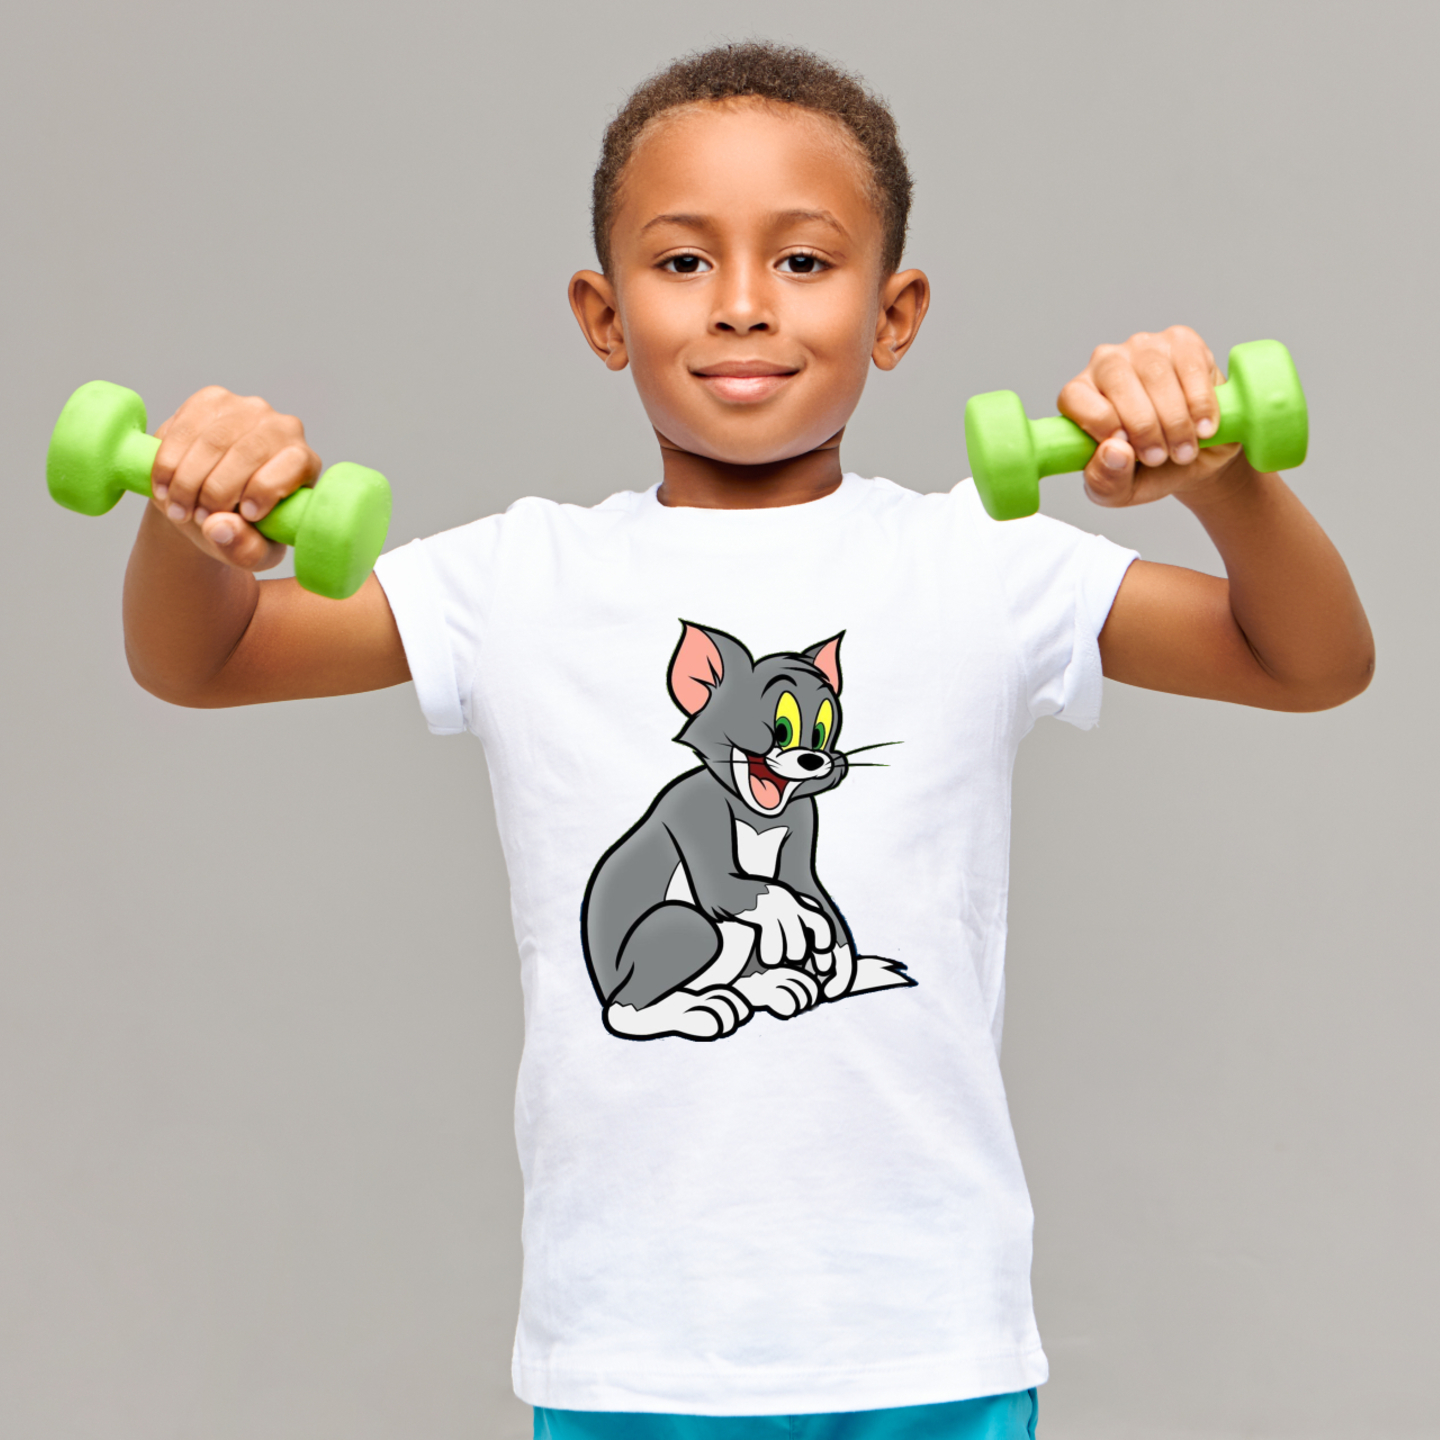 Tom & Jerry Printed T-Shirt For Boys